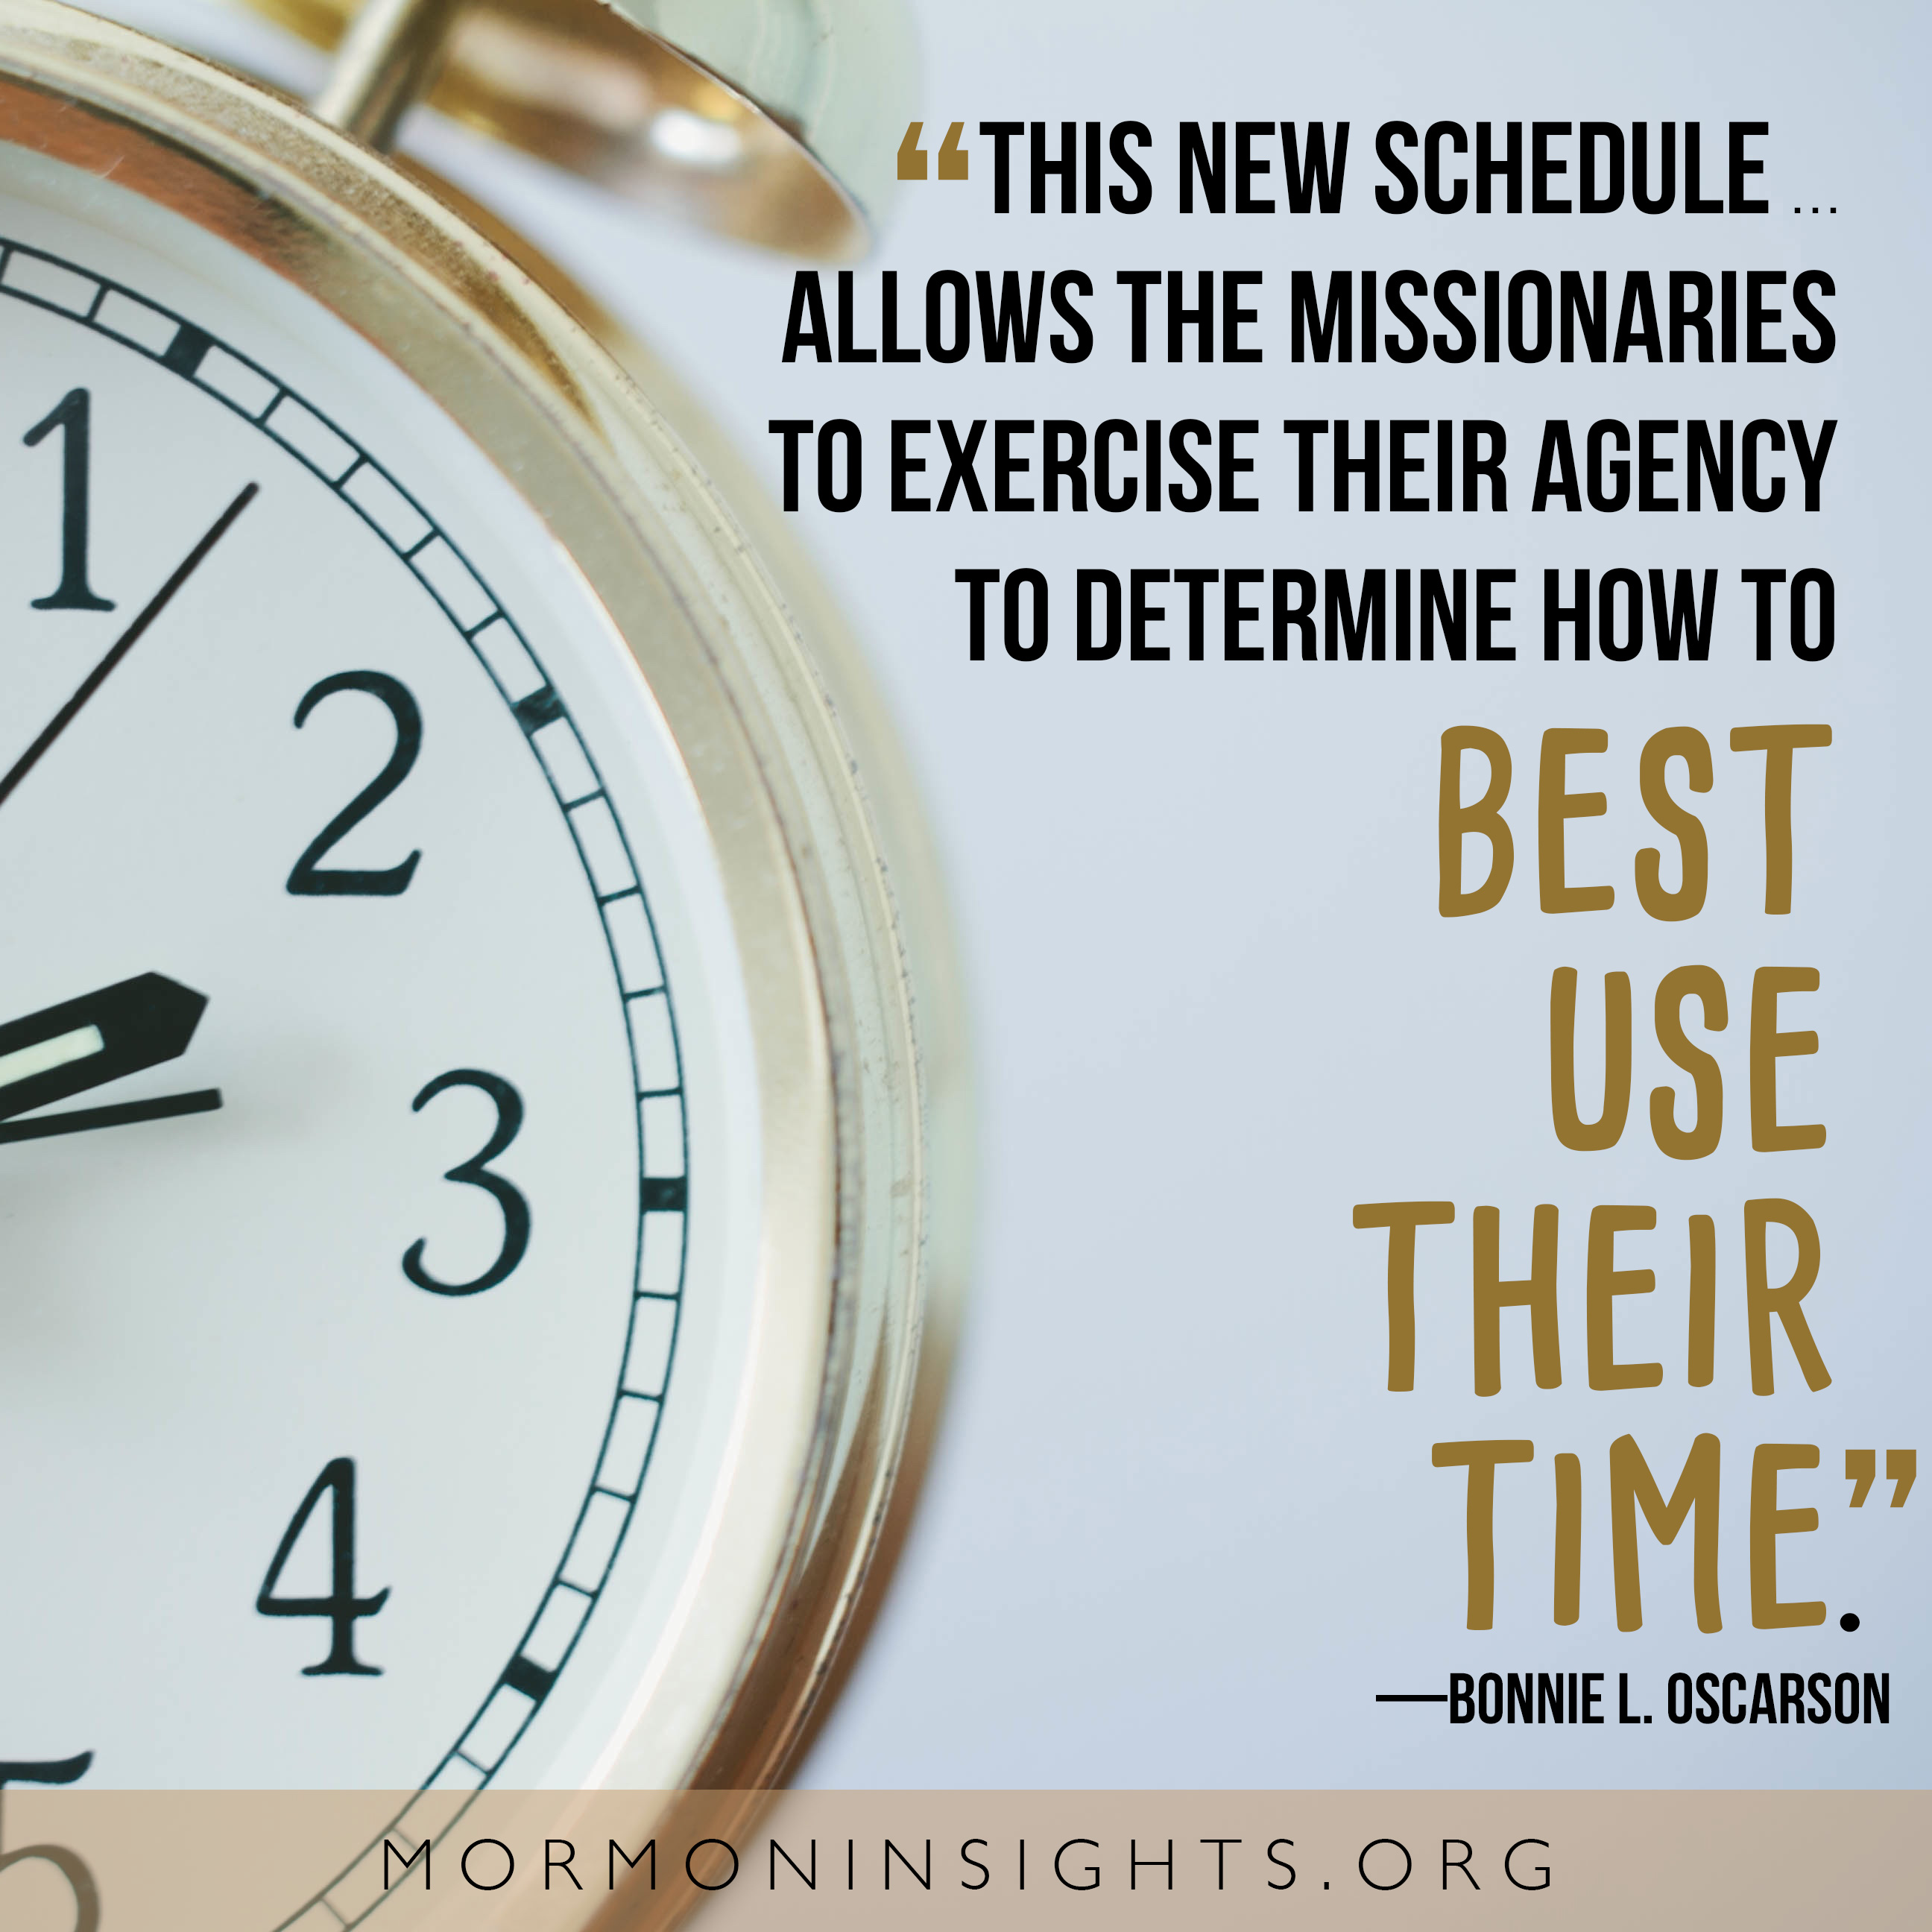 This new schedule . . . allows the missionaries to exercise their agency to determine how to best use their time. —Bonnie L. Oscarson